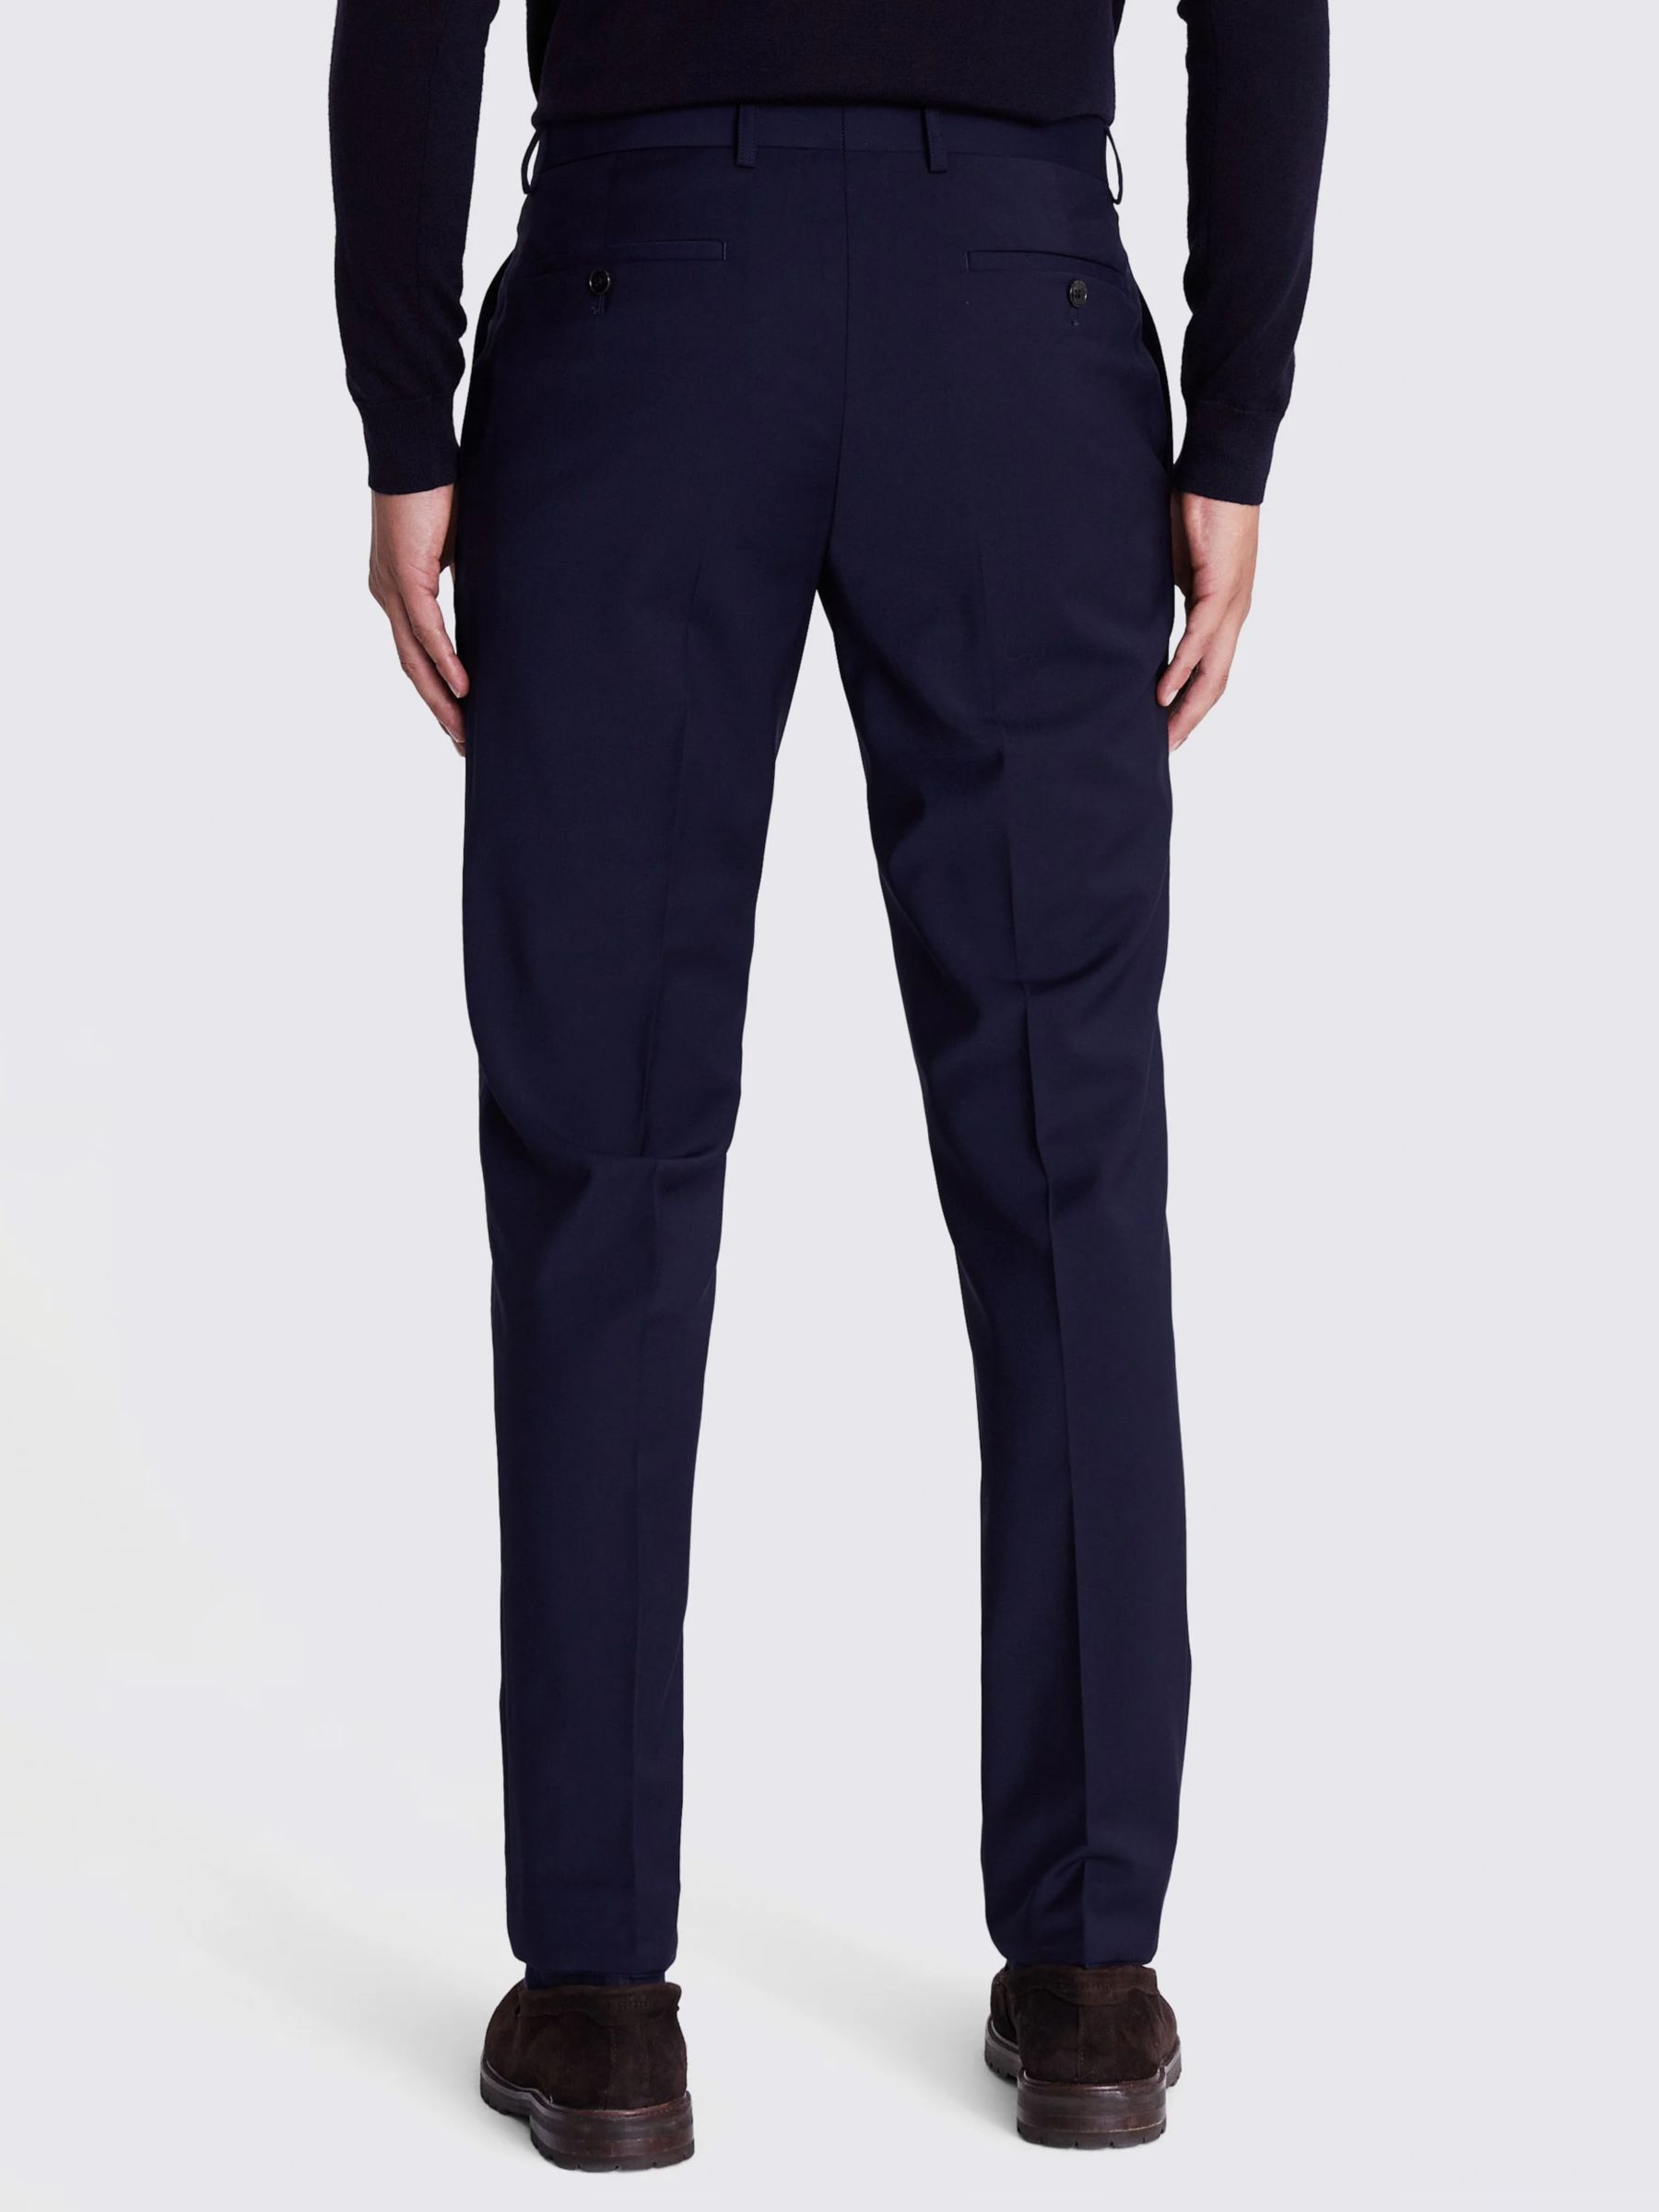 Buy Moss x DKNY Wool Blend Slim Fit Suit Trousers Online at johnlewis.com